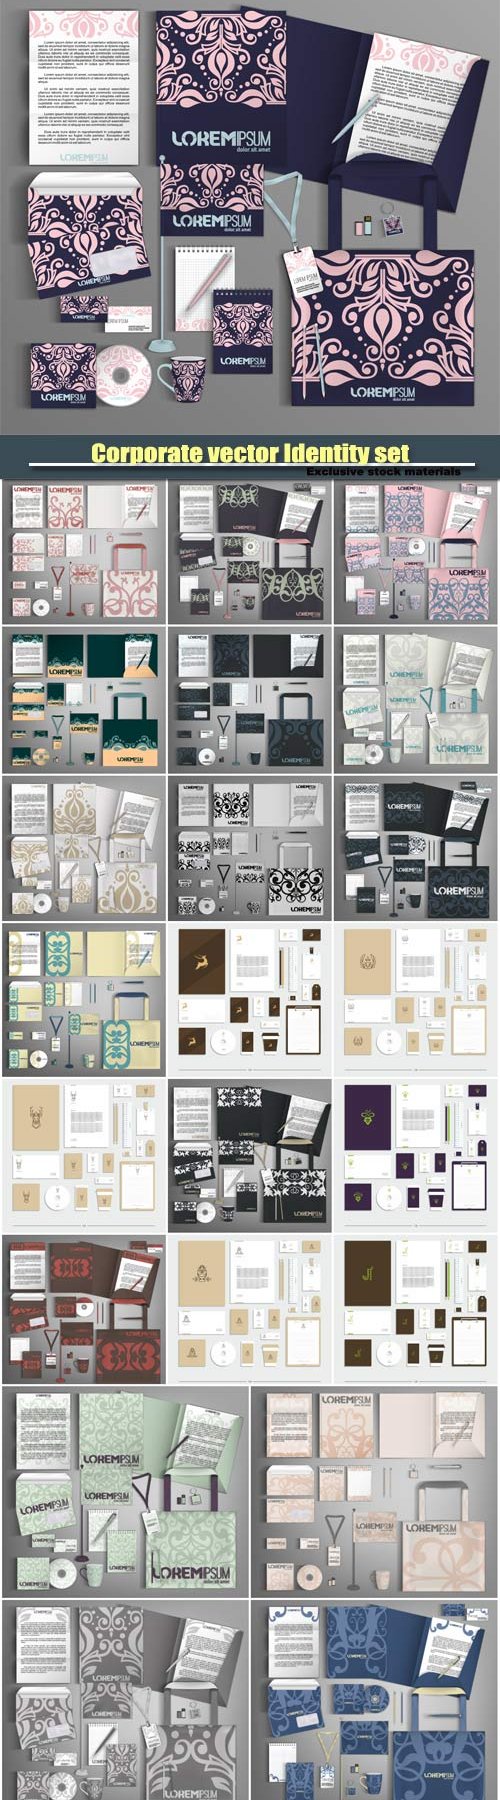   Corporate vector Identity set with abstract pattern